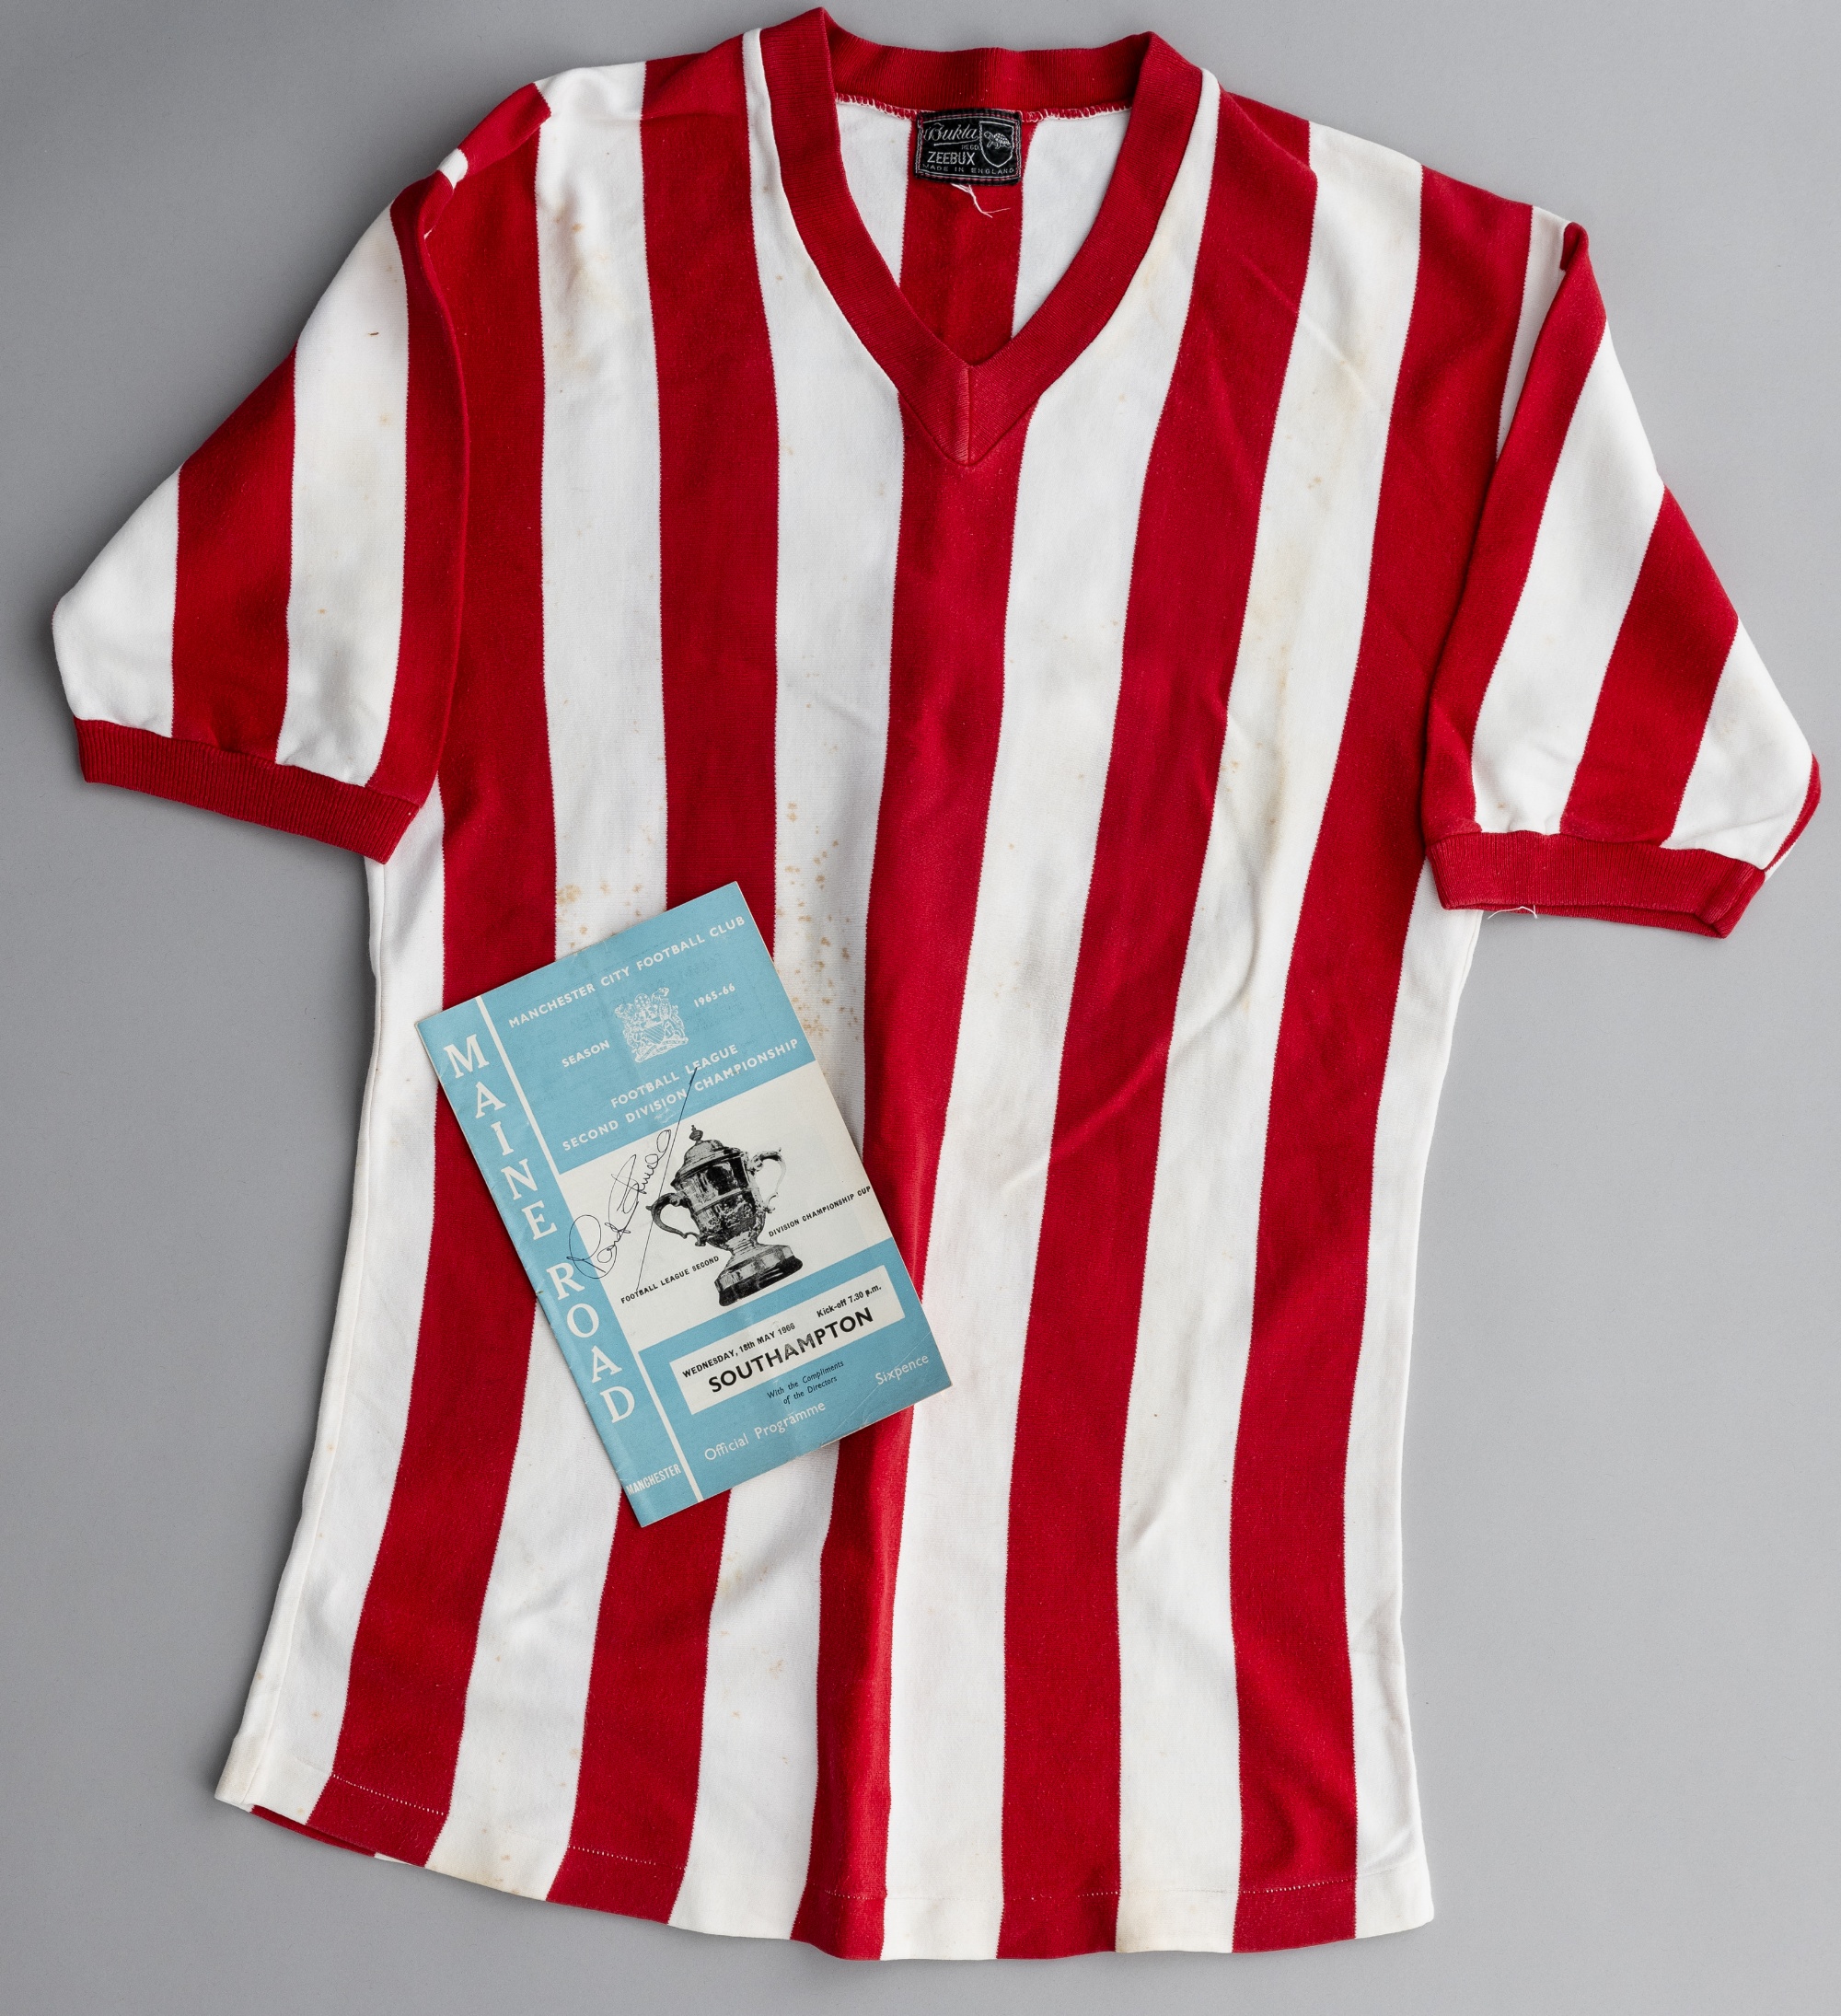 The shirt worn by Martin Chivers in the match when Southampton FC won promotion to Football League